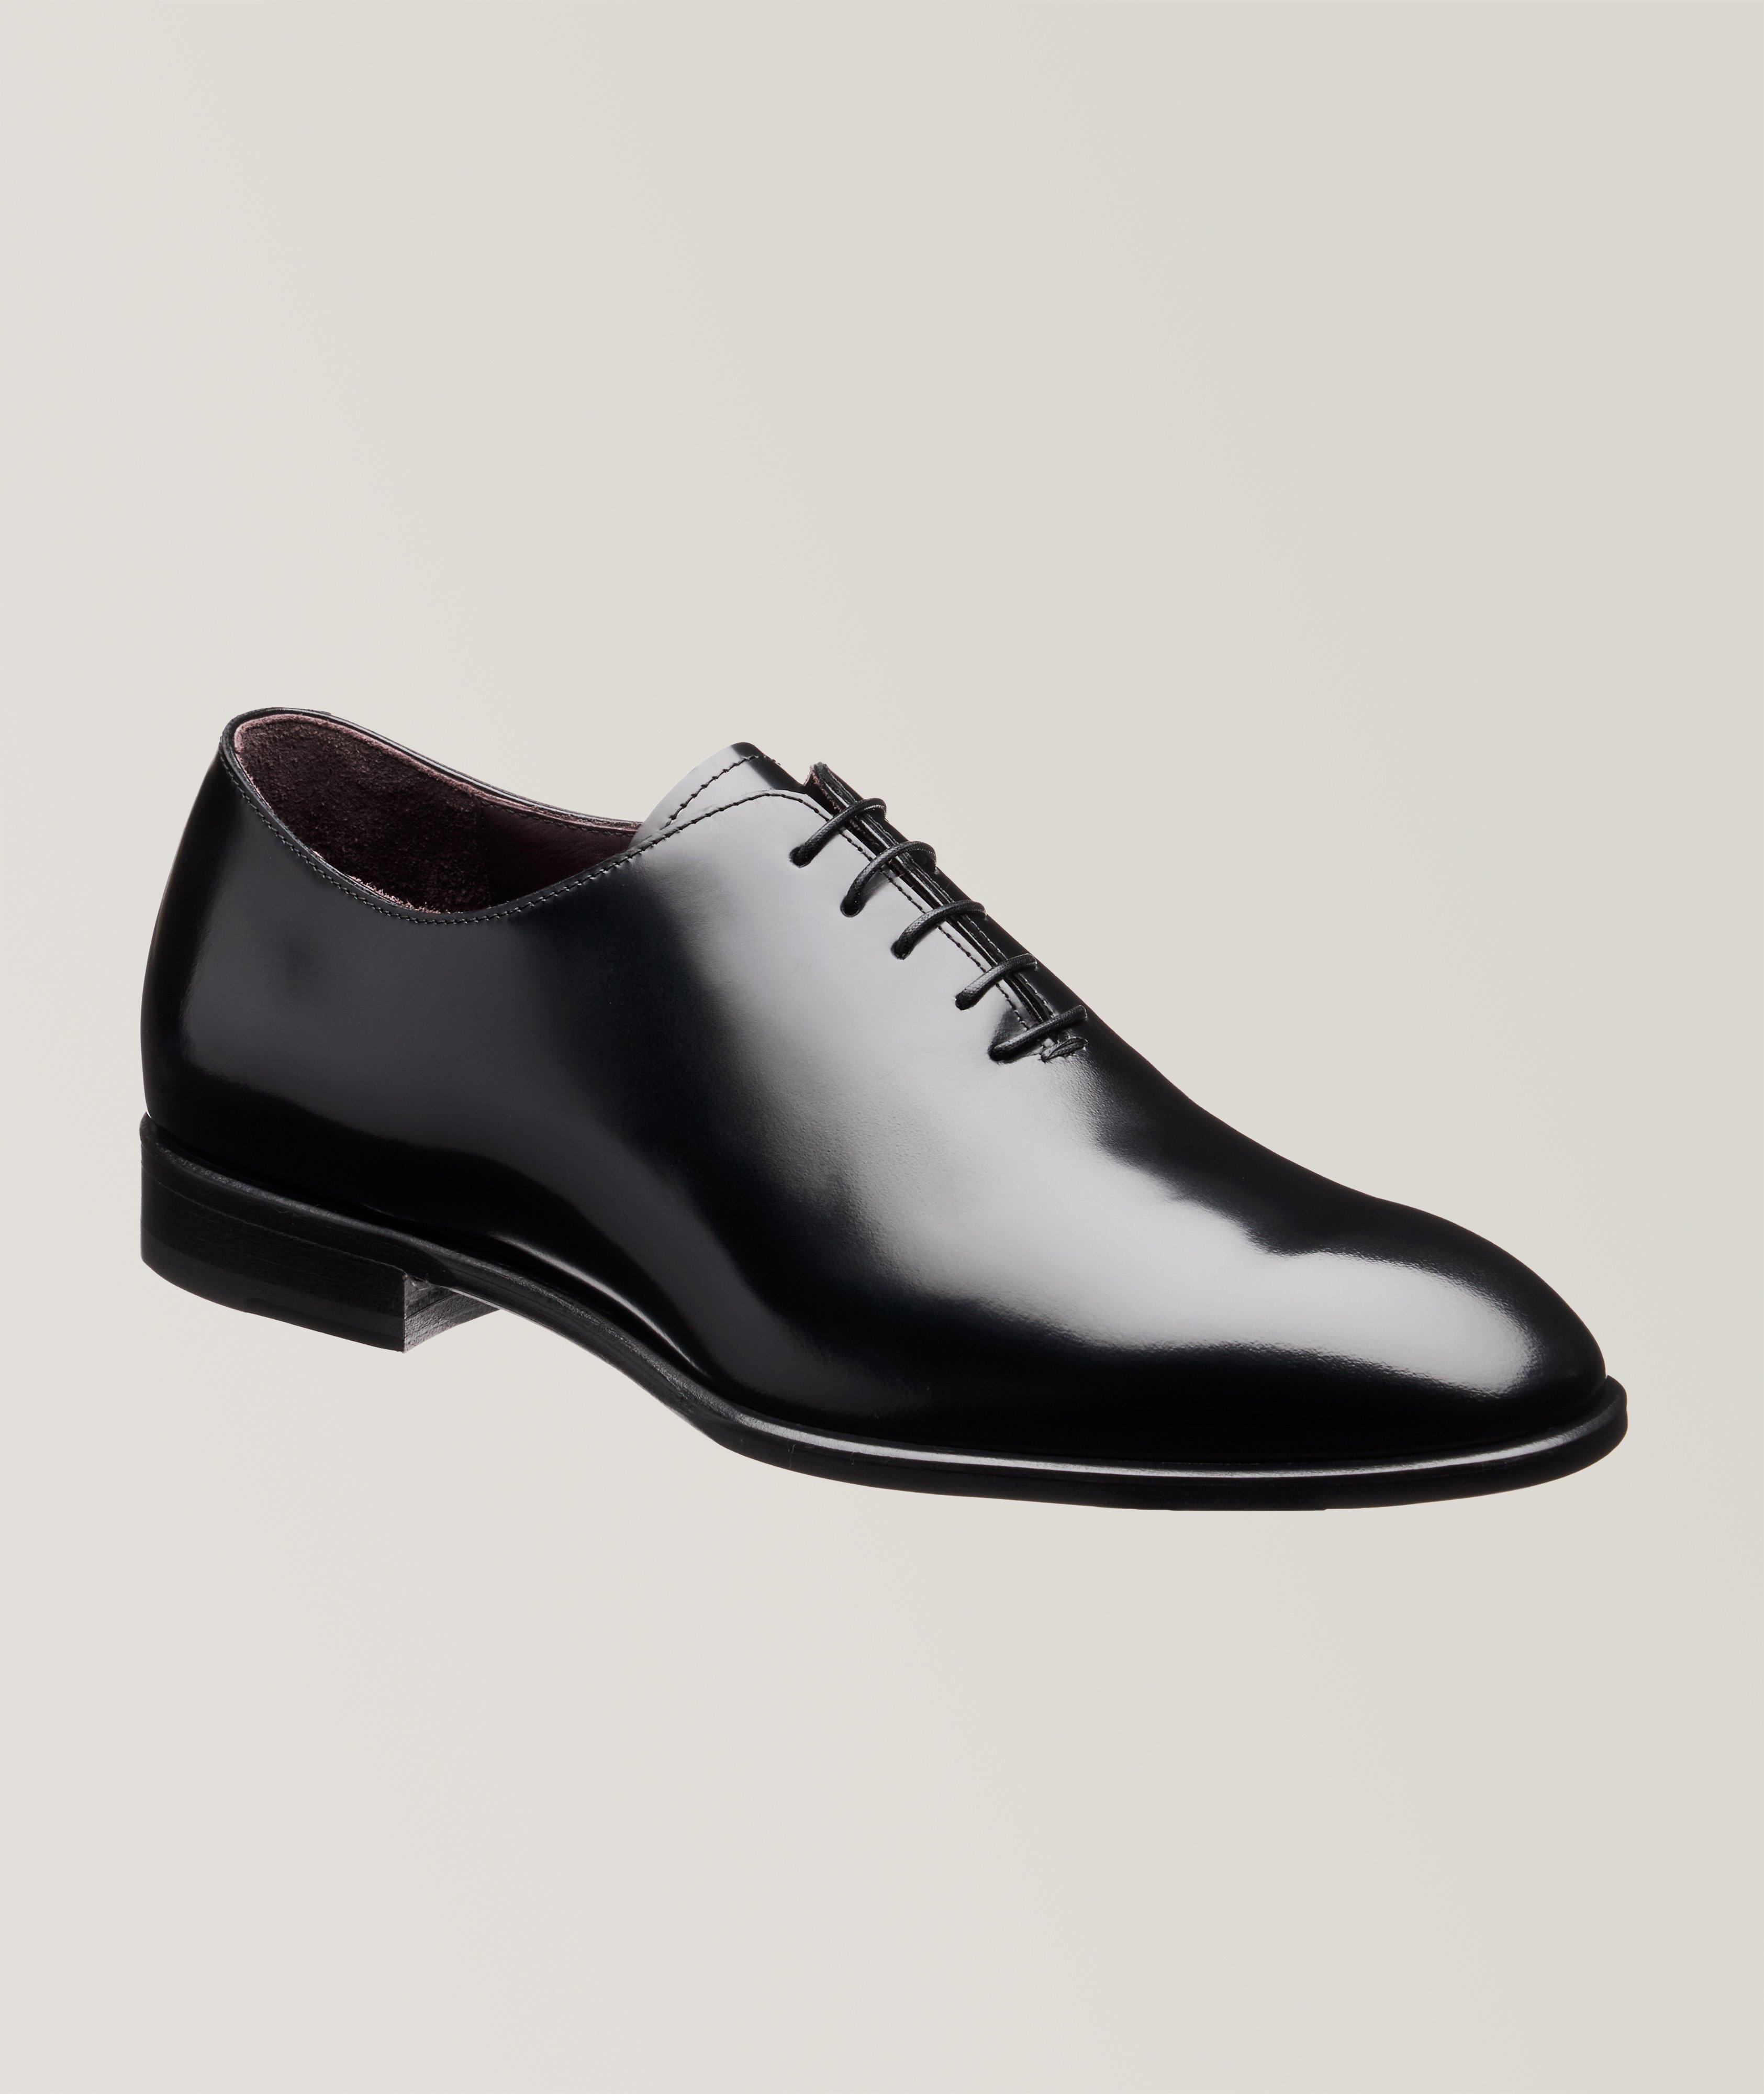 Wholecut Lace-up Leather Oxford image 0